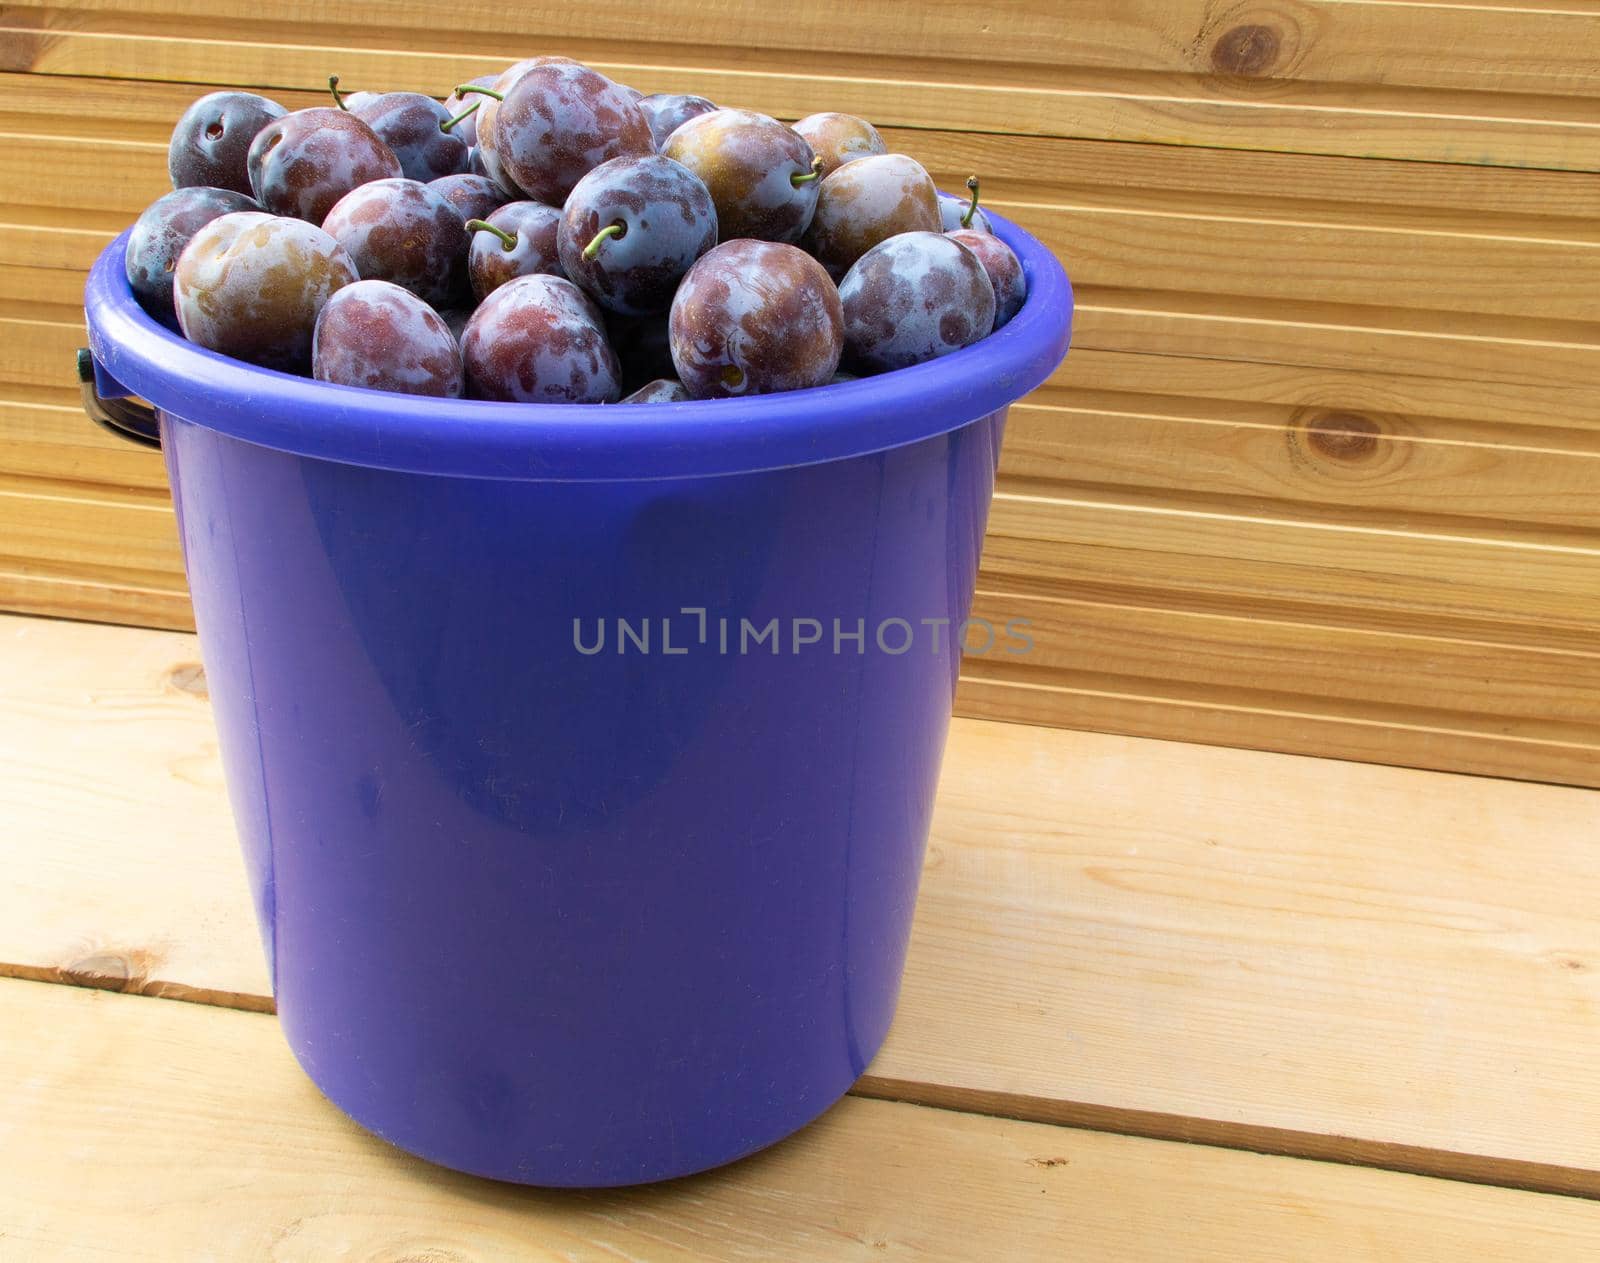 A bucket full of fresh plums on wooden background by Mindru